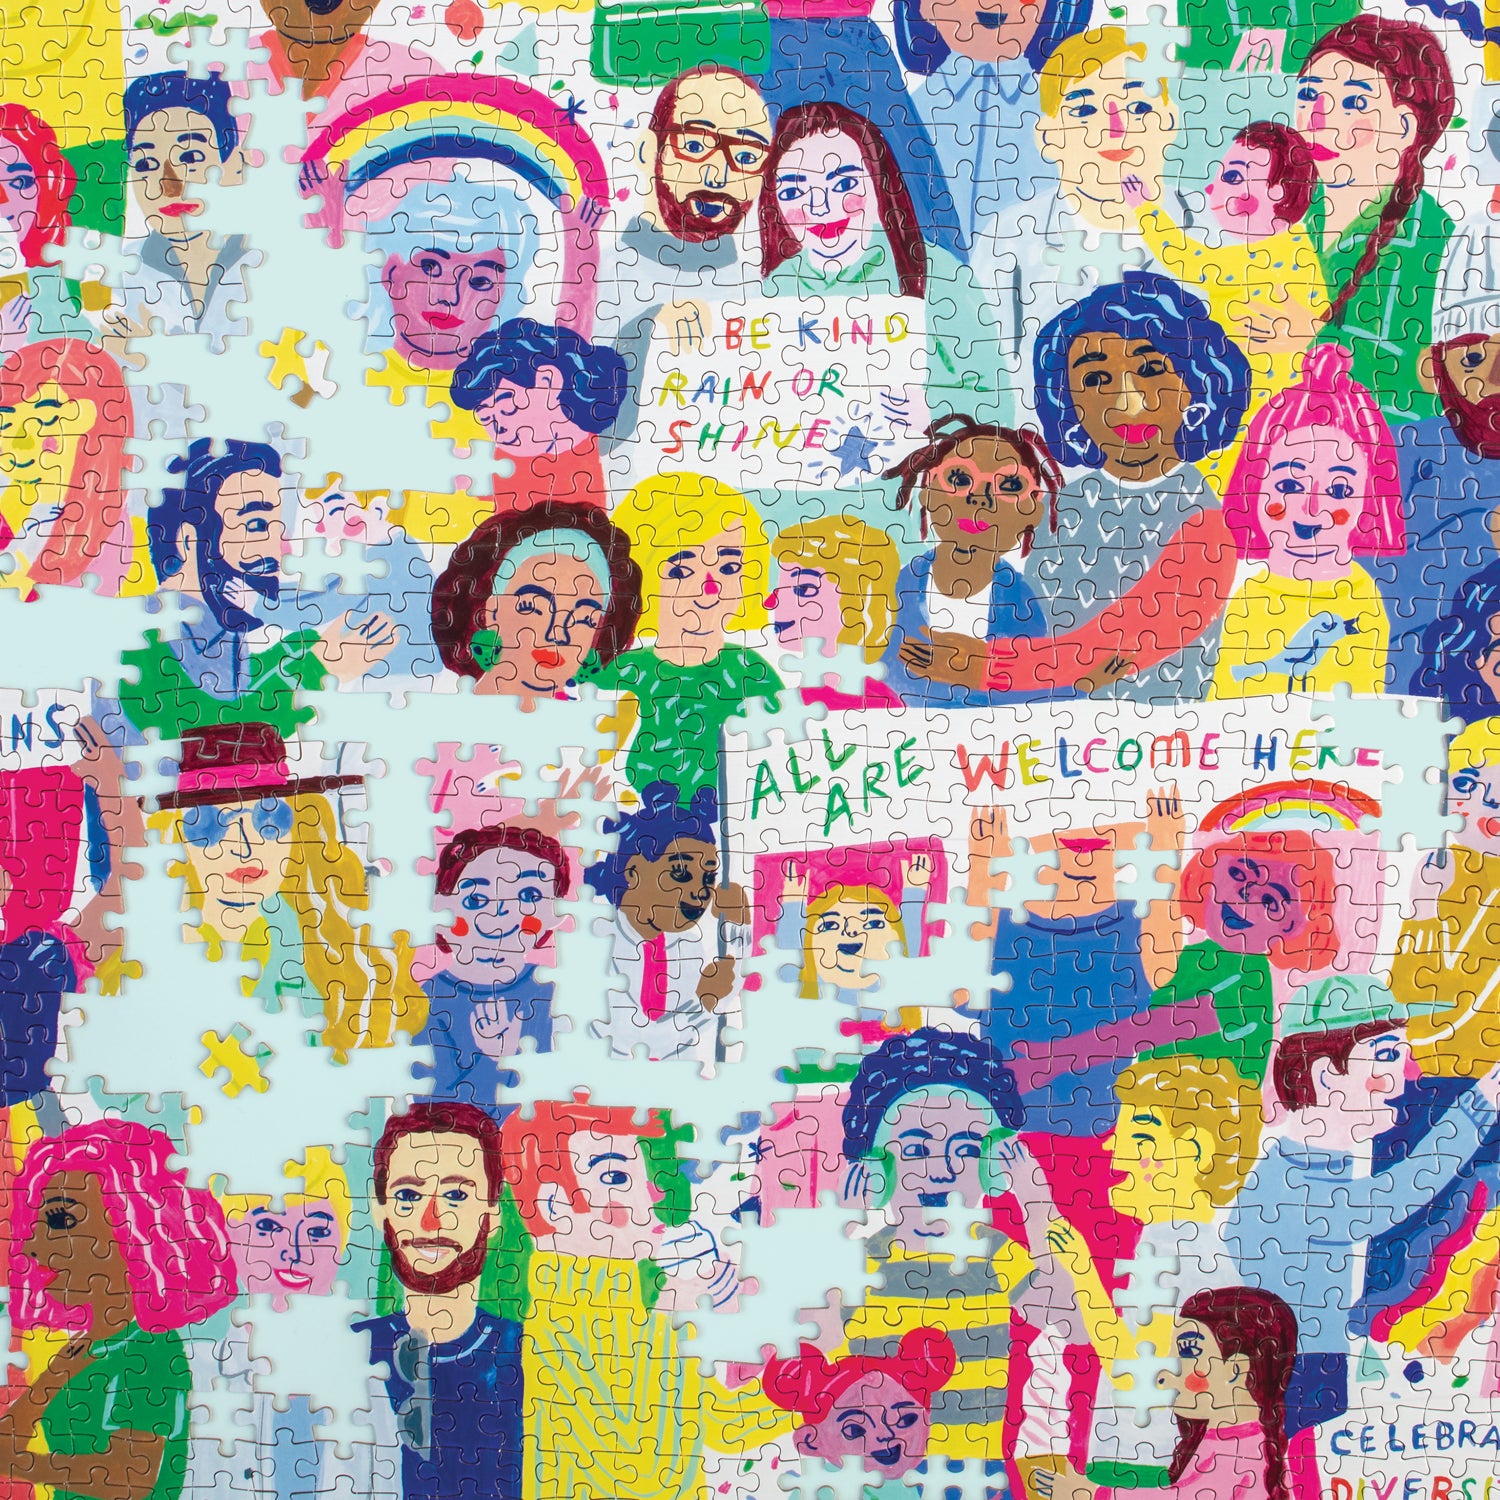 All Are Welcome Here! 1000 Piece Jigsaw Puzzle closeup